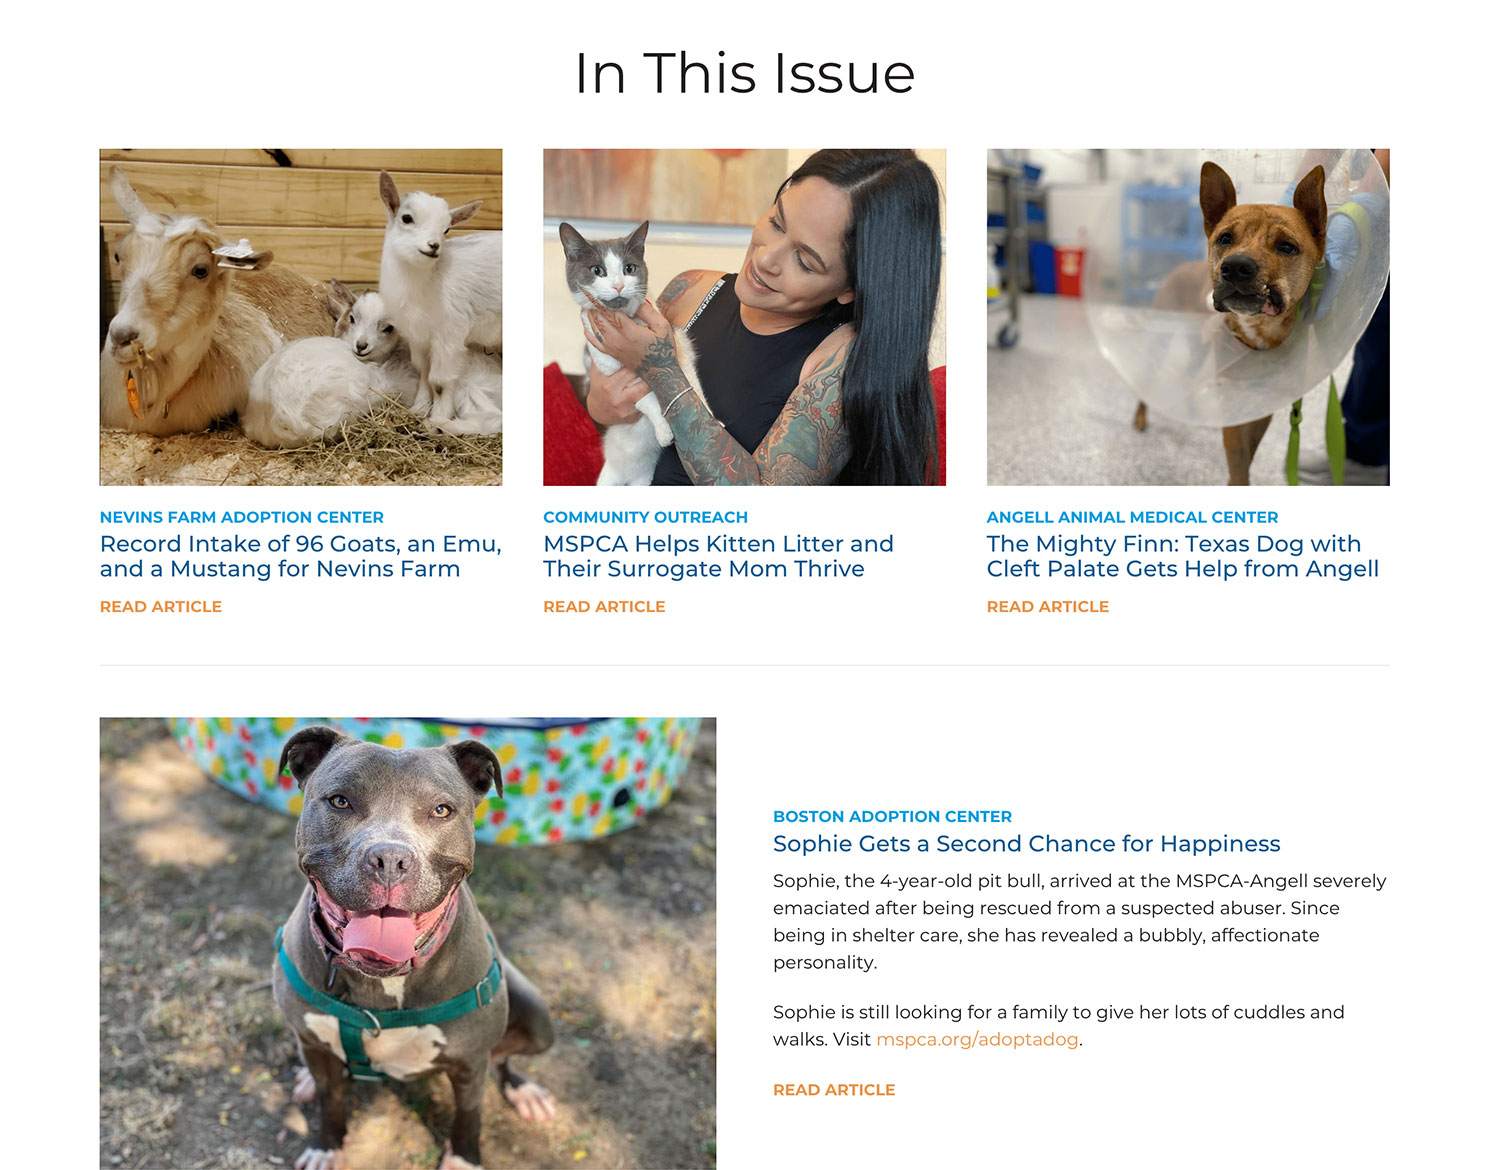 MSPCA-Angell newsletter website showing news stories with cats and dogs